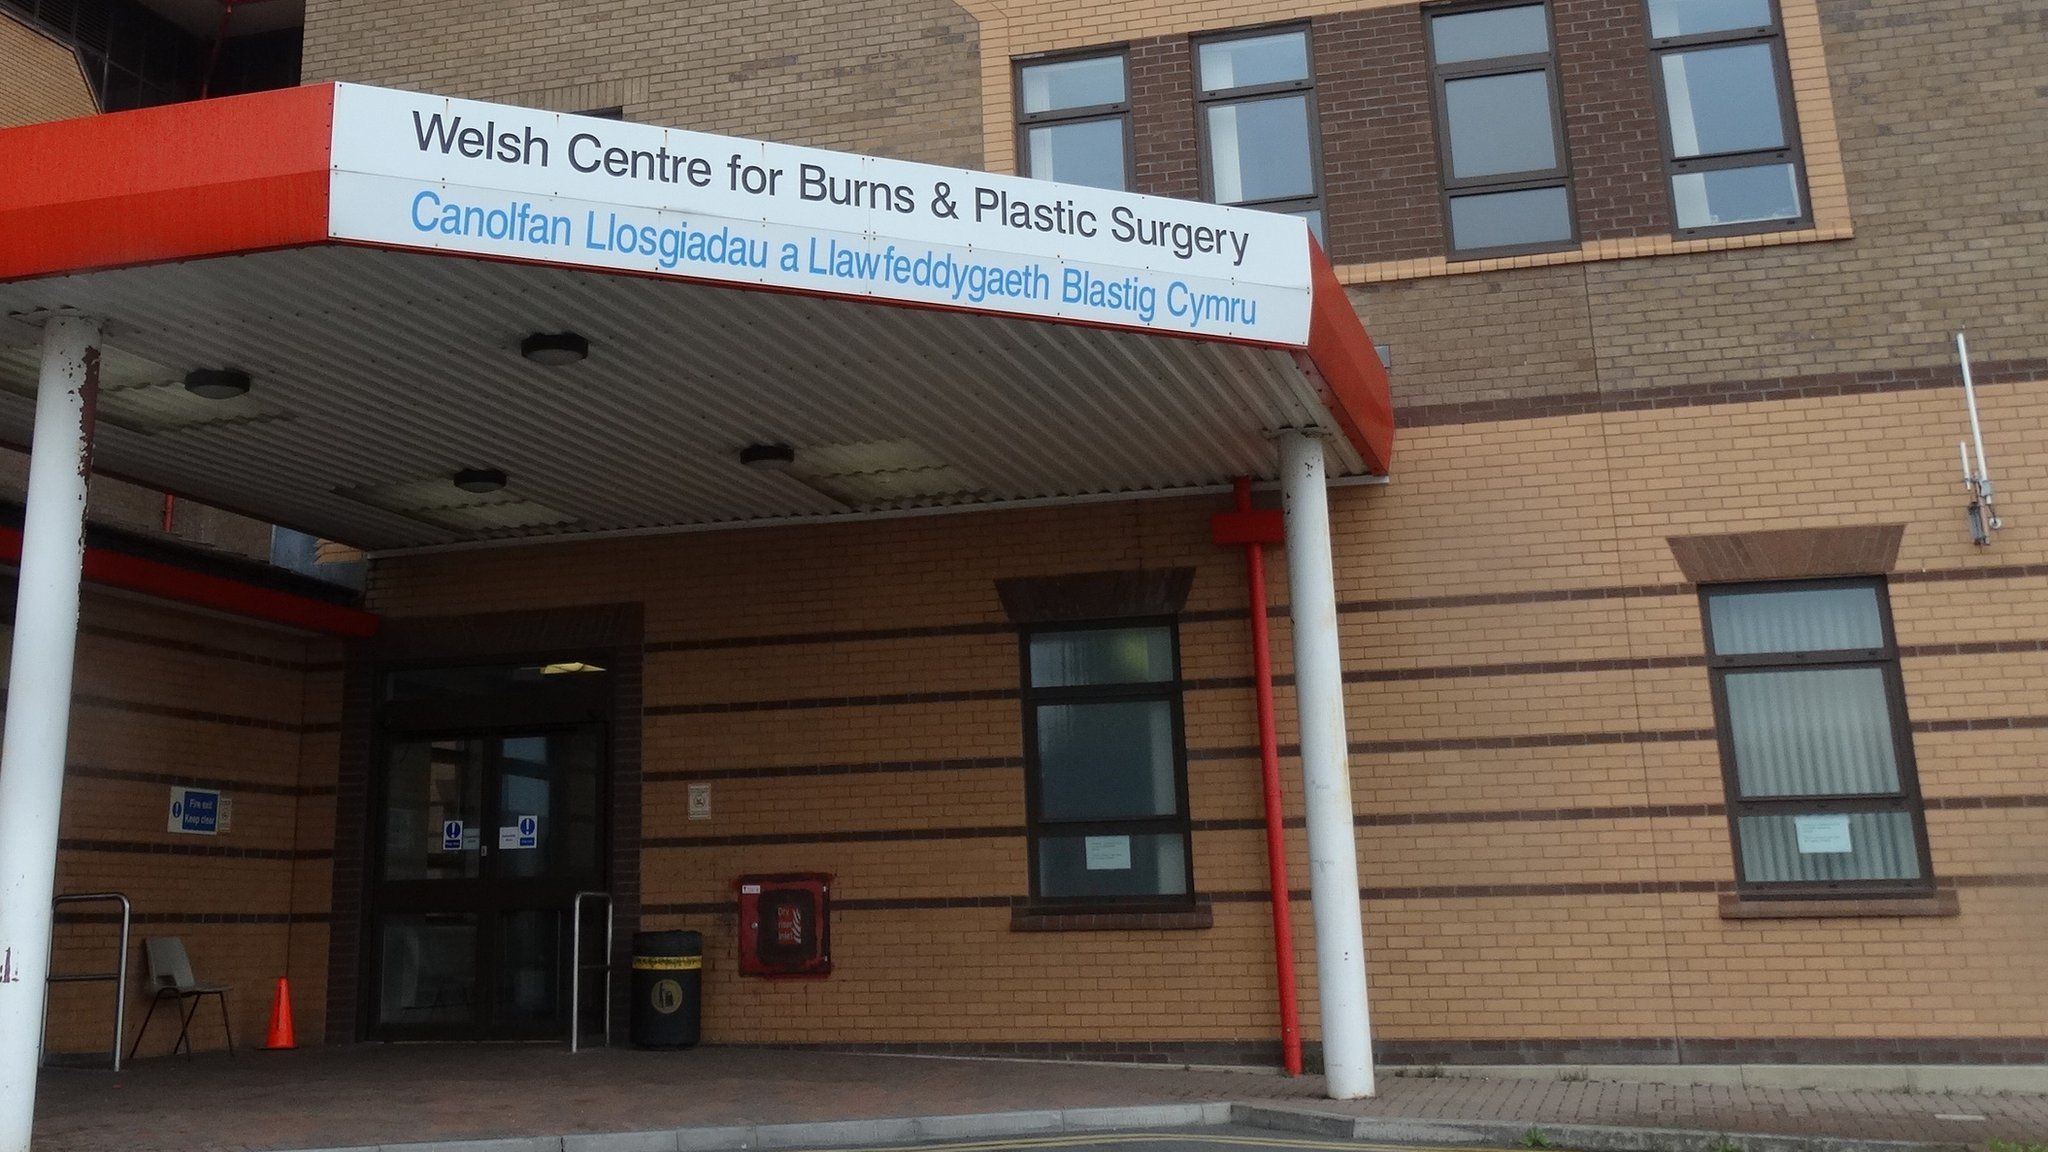 The Welsh Centre for Burns and Plastic Surgery